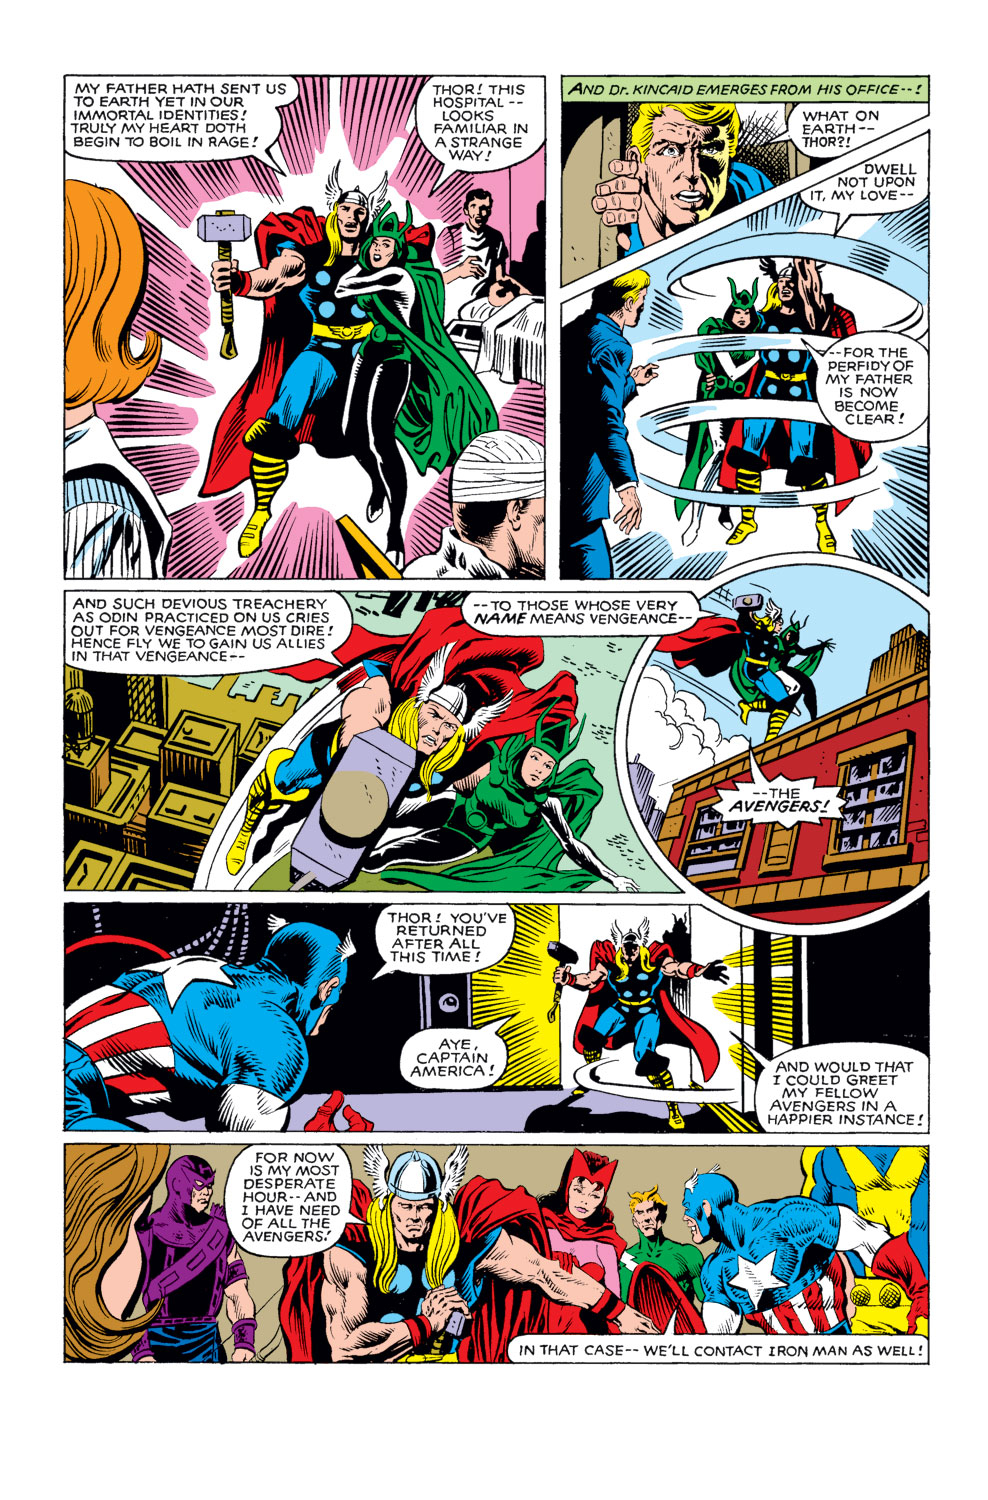 What If? (1977) issue 25 - Thor and the Avengers battled the gods - Page 6